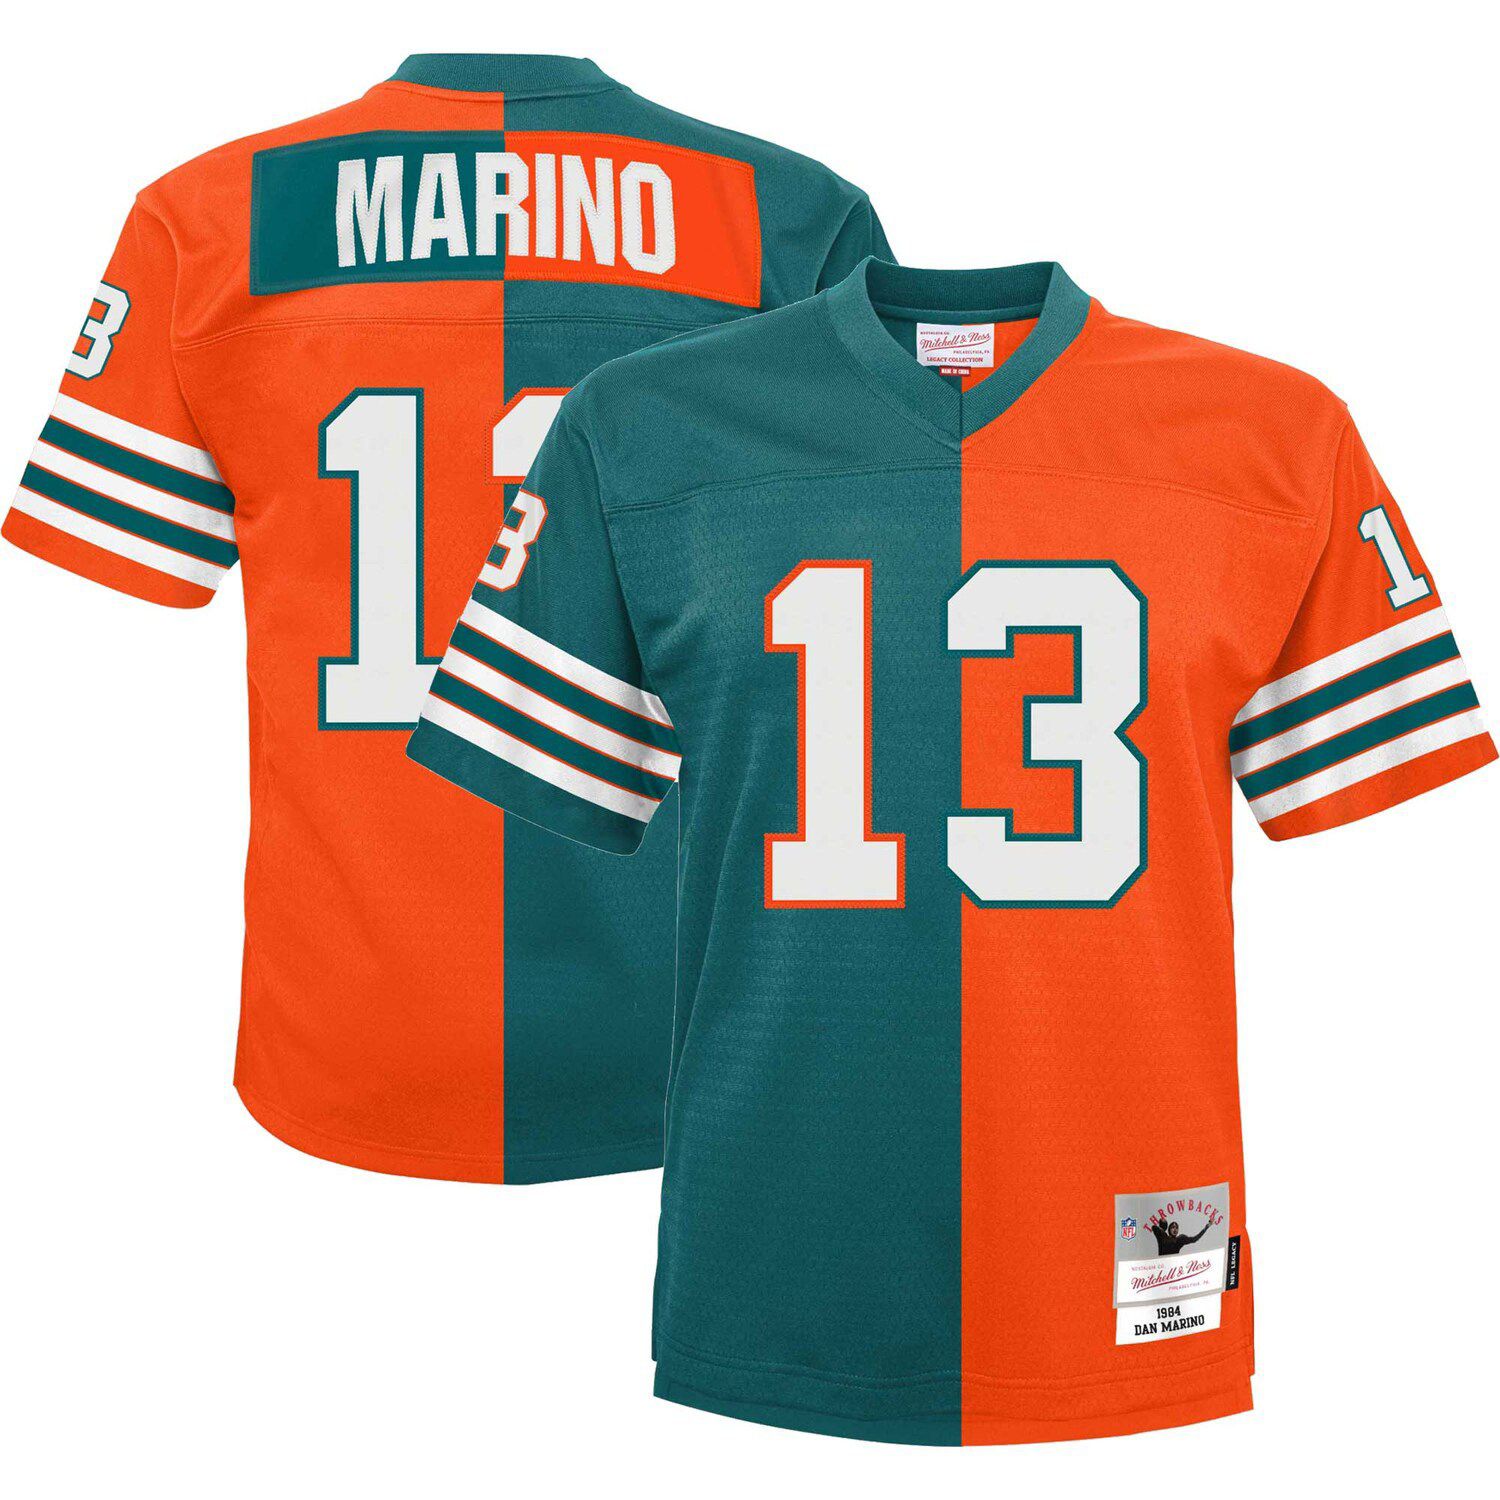 Dolphins limited edition jersey